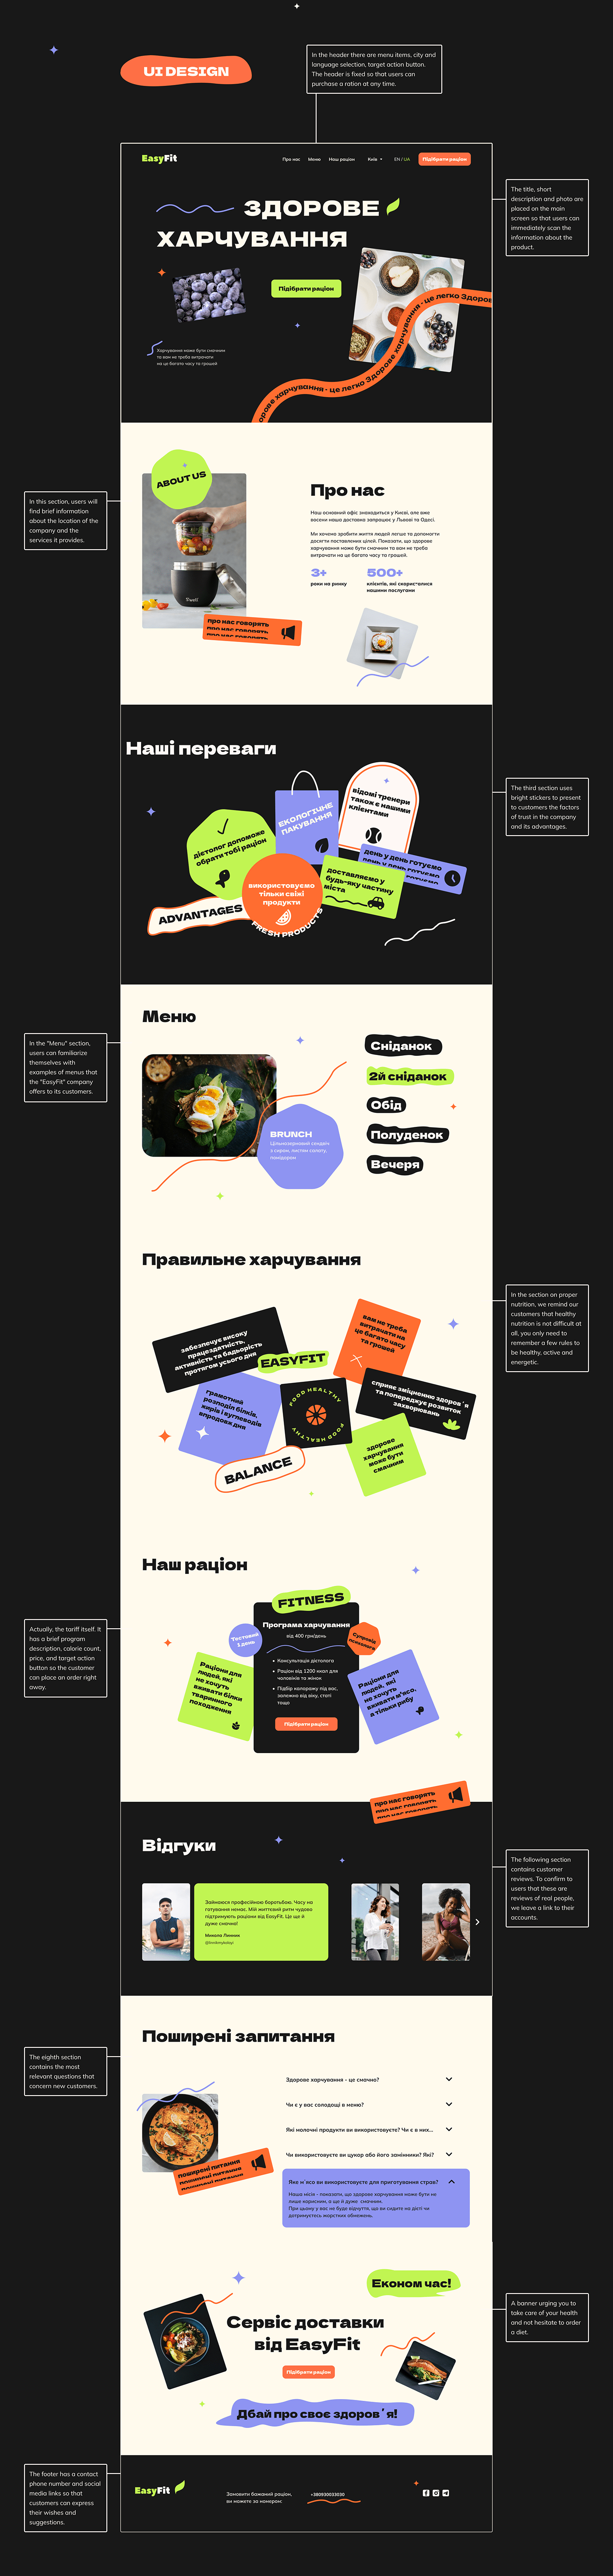 landing page UI/UX user interface ui design user experience Figma delivery healthy food menu